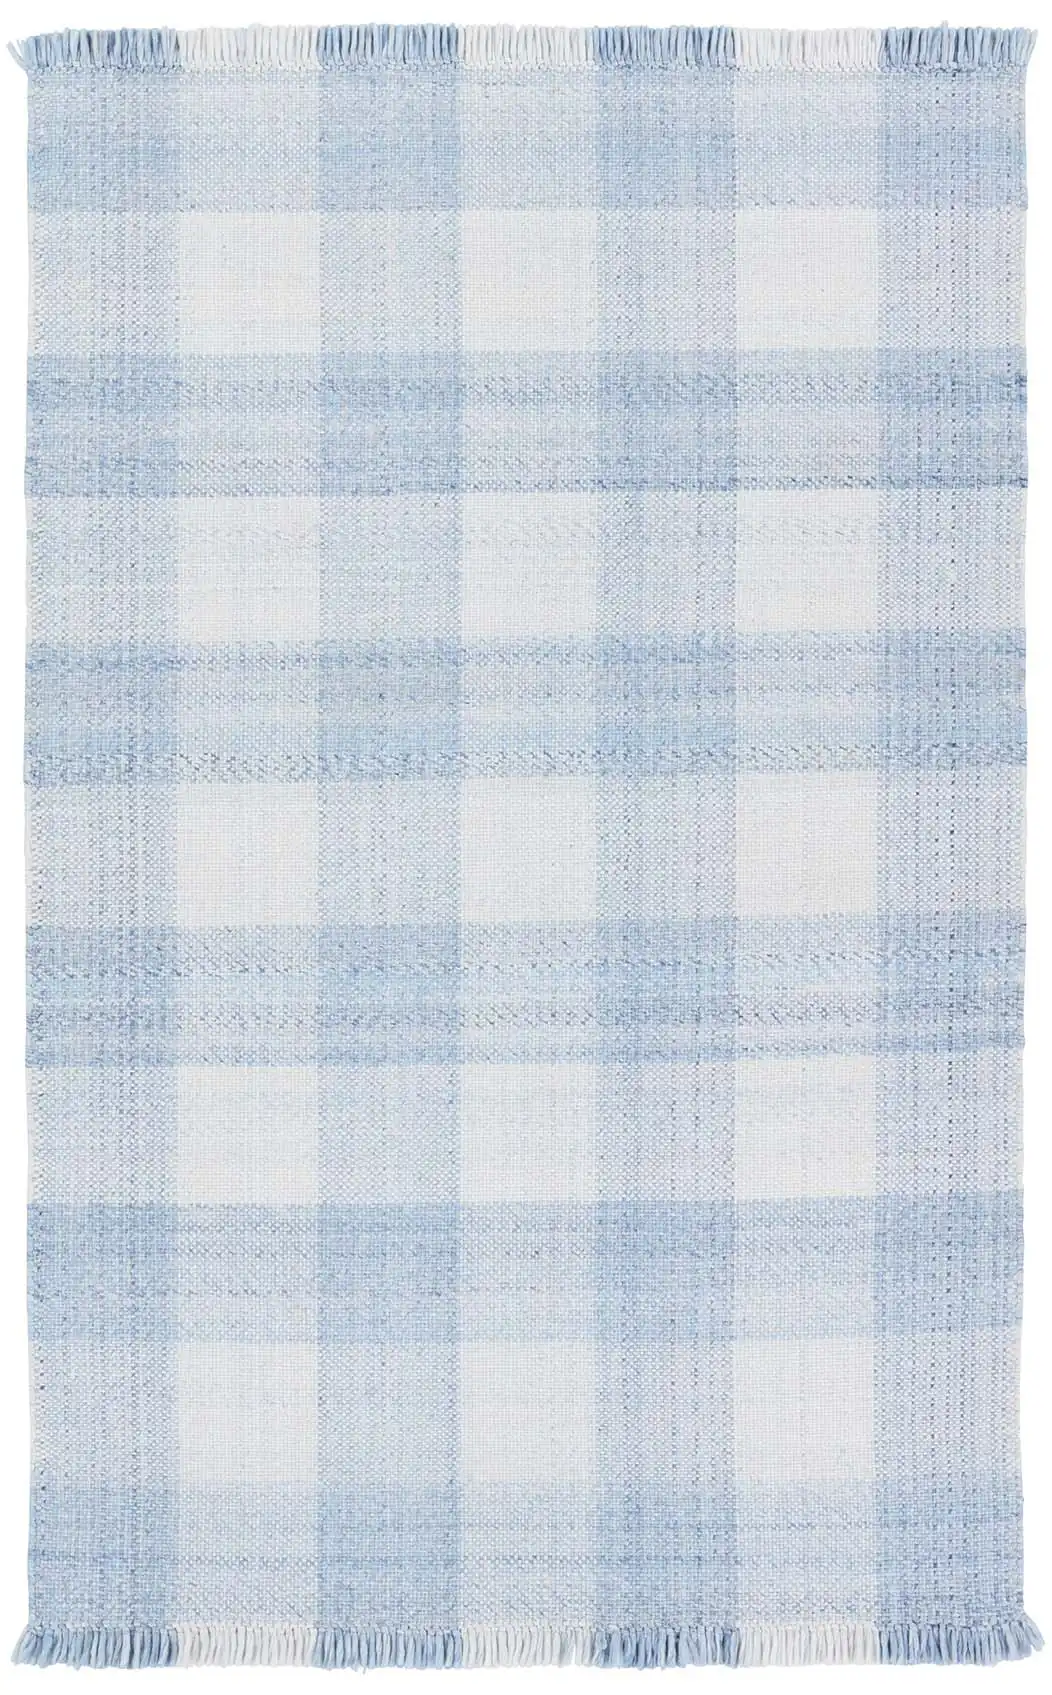 Jaipur Living Truce Handmade Indoor/Outdoor Striped Light Blue/ Ivory Area Rug  Product Image